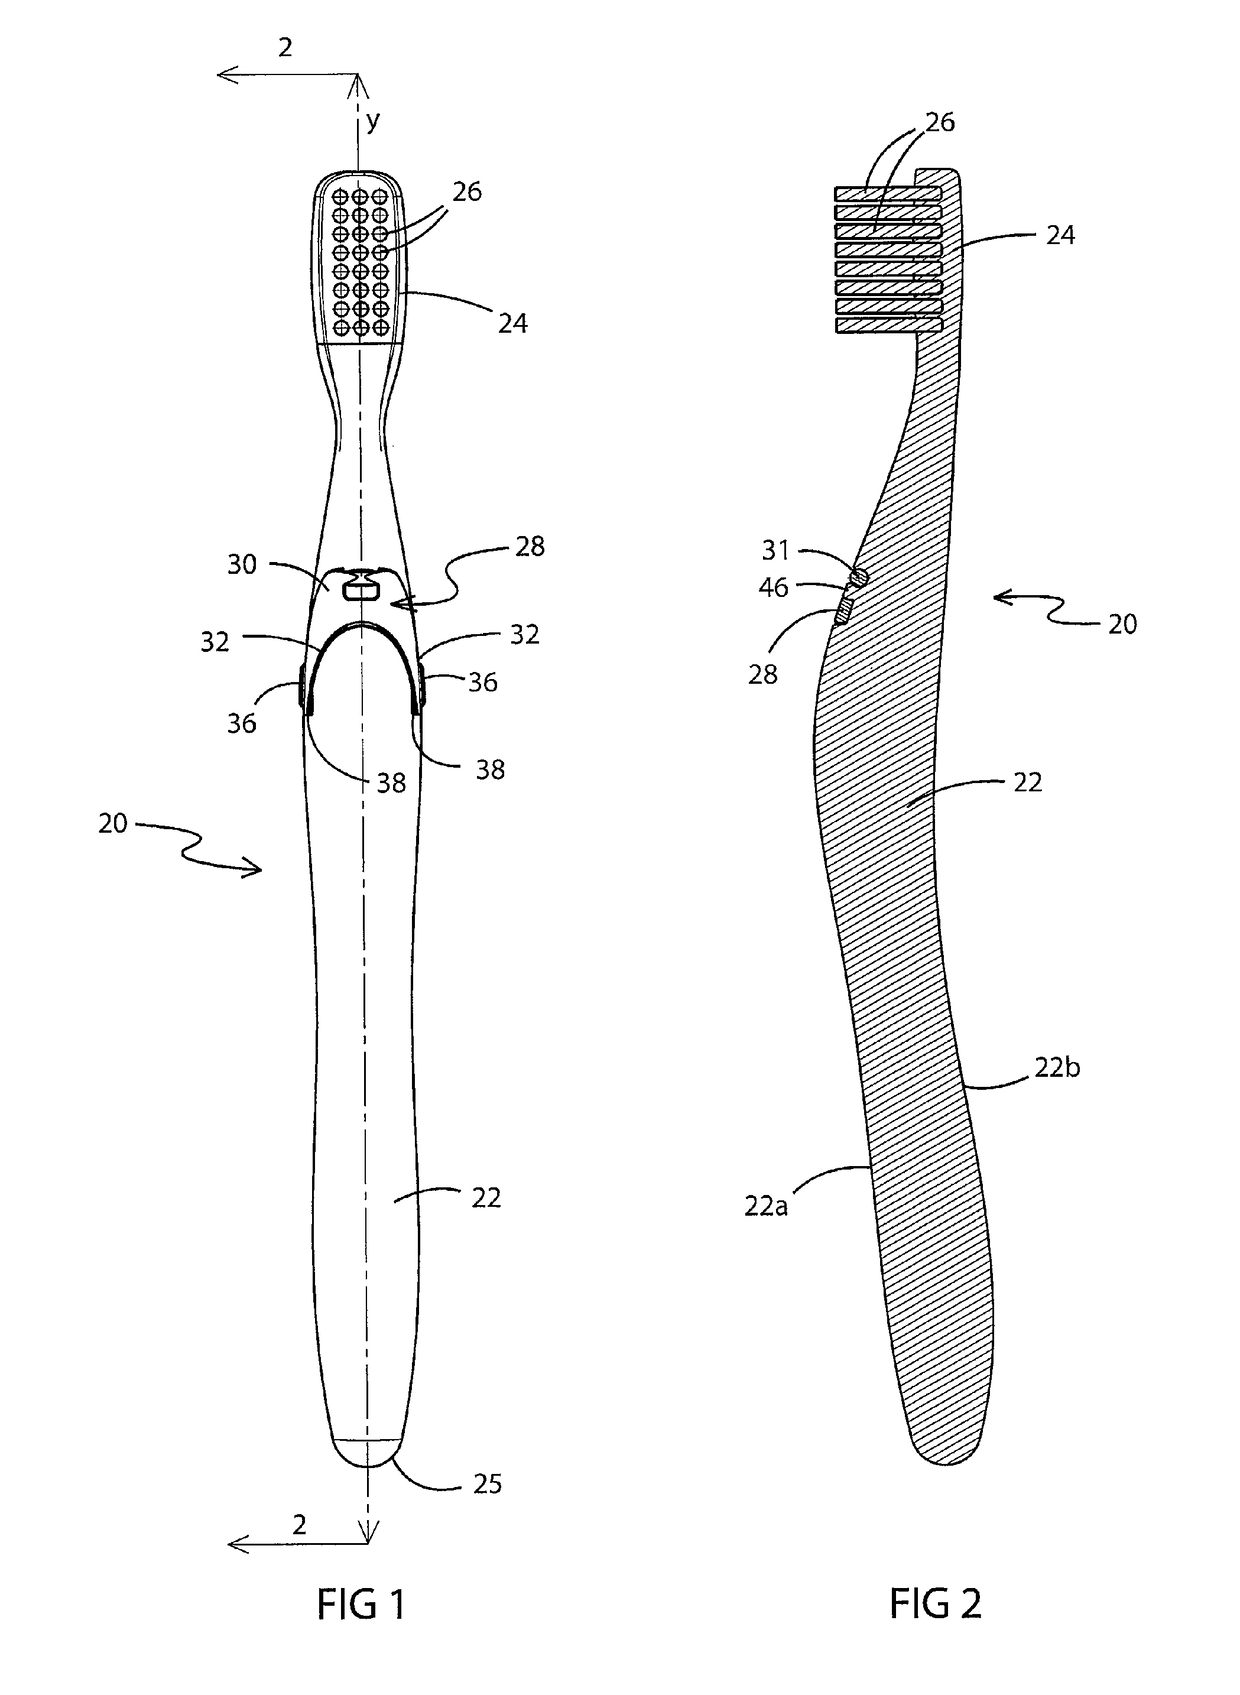 Self-supporting manual toothbrush